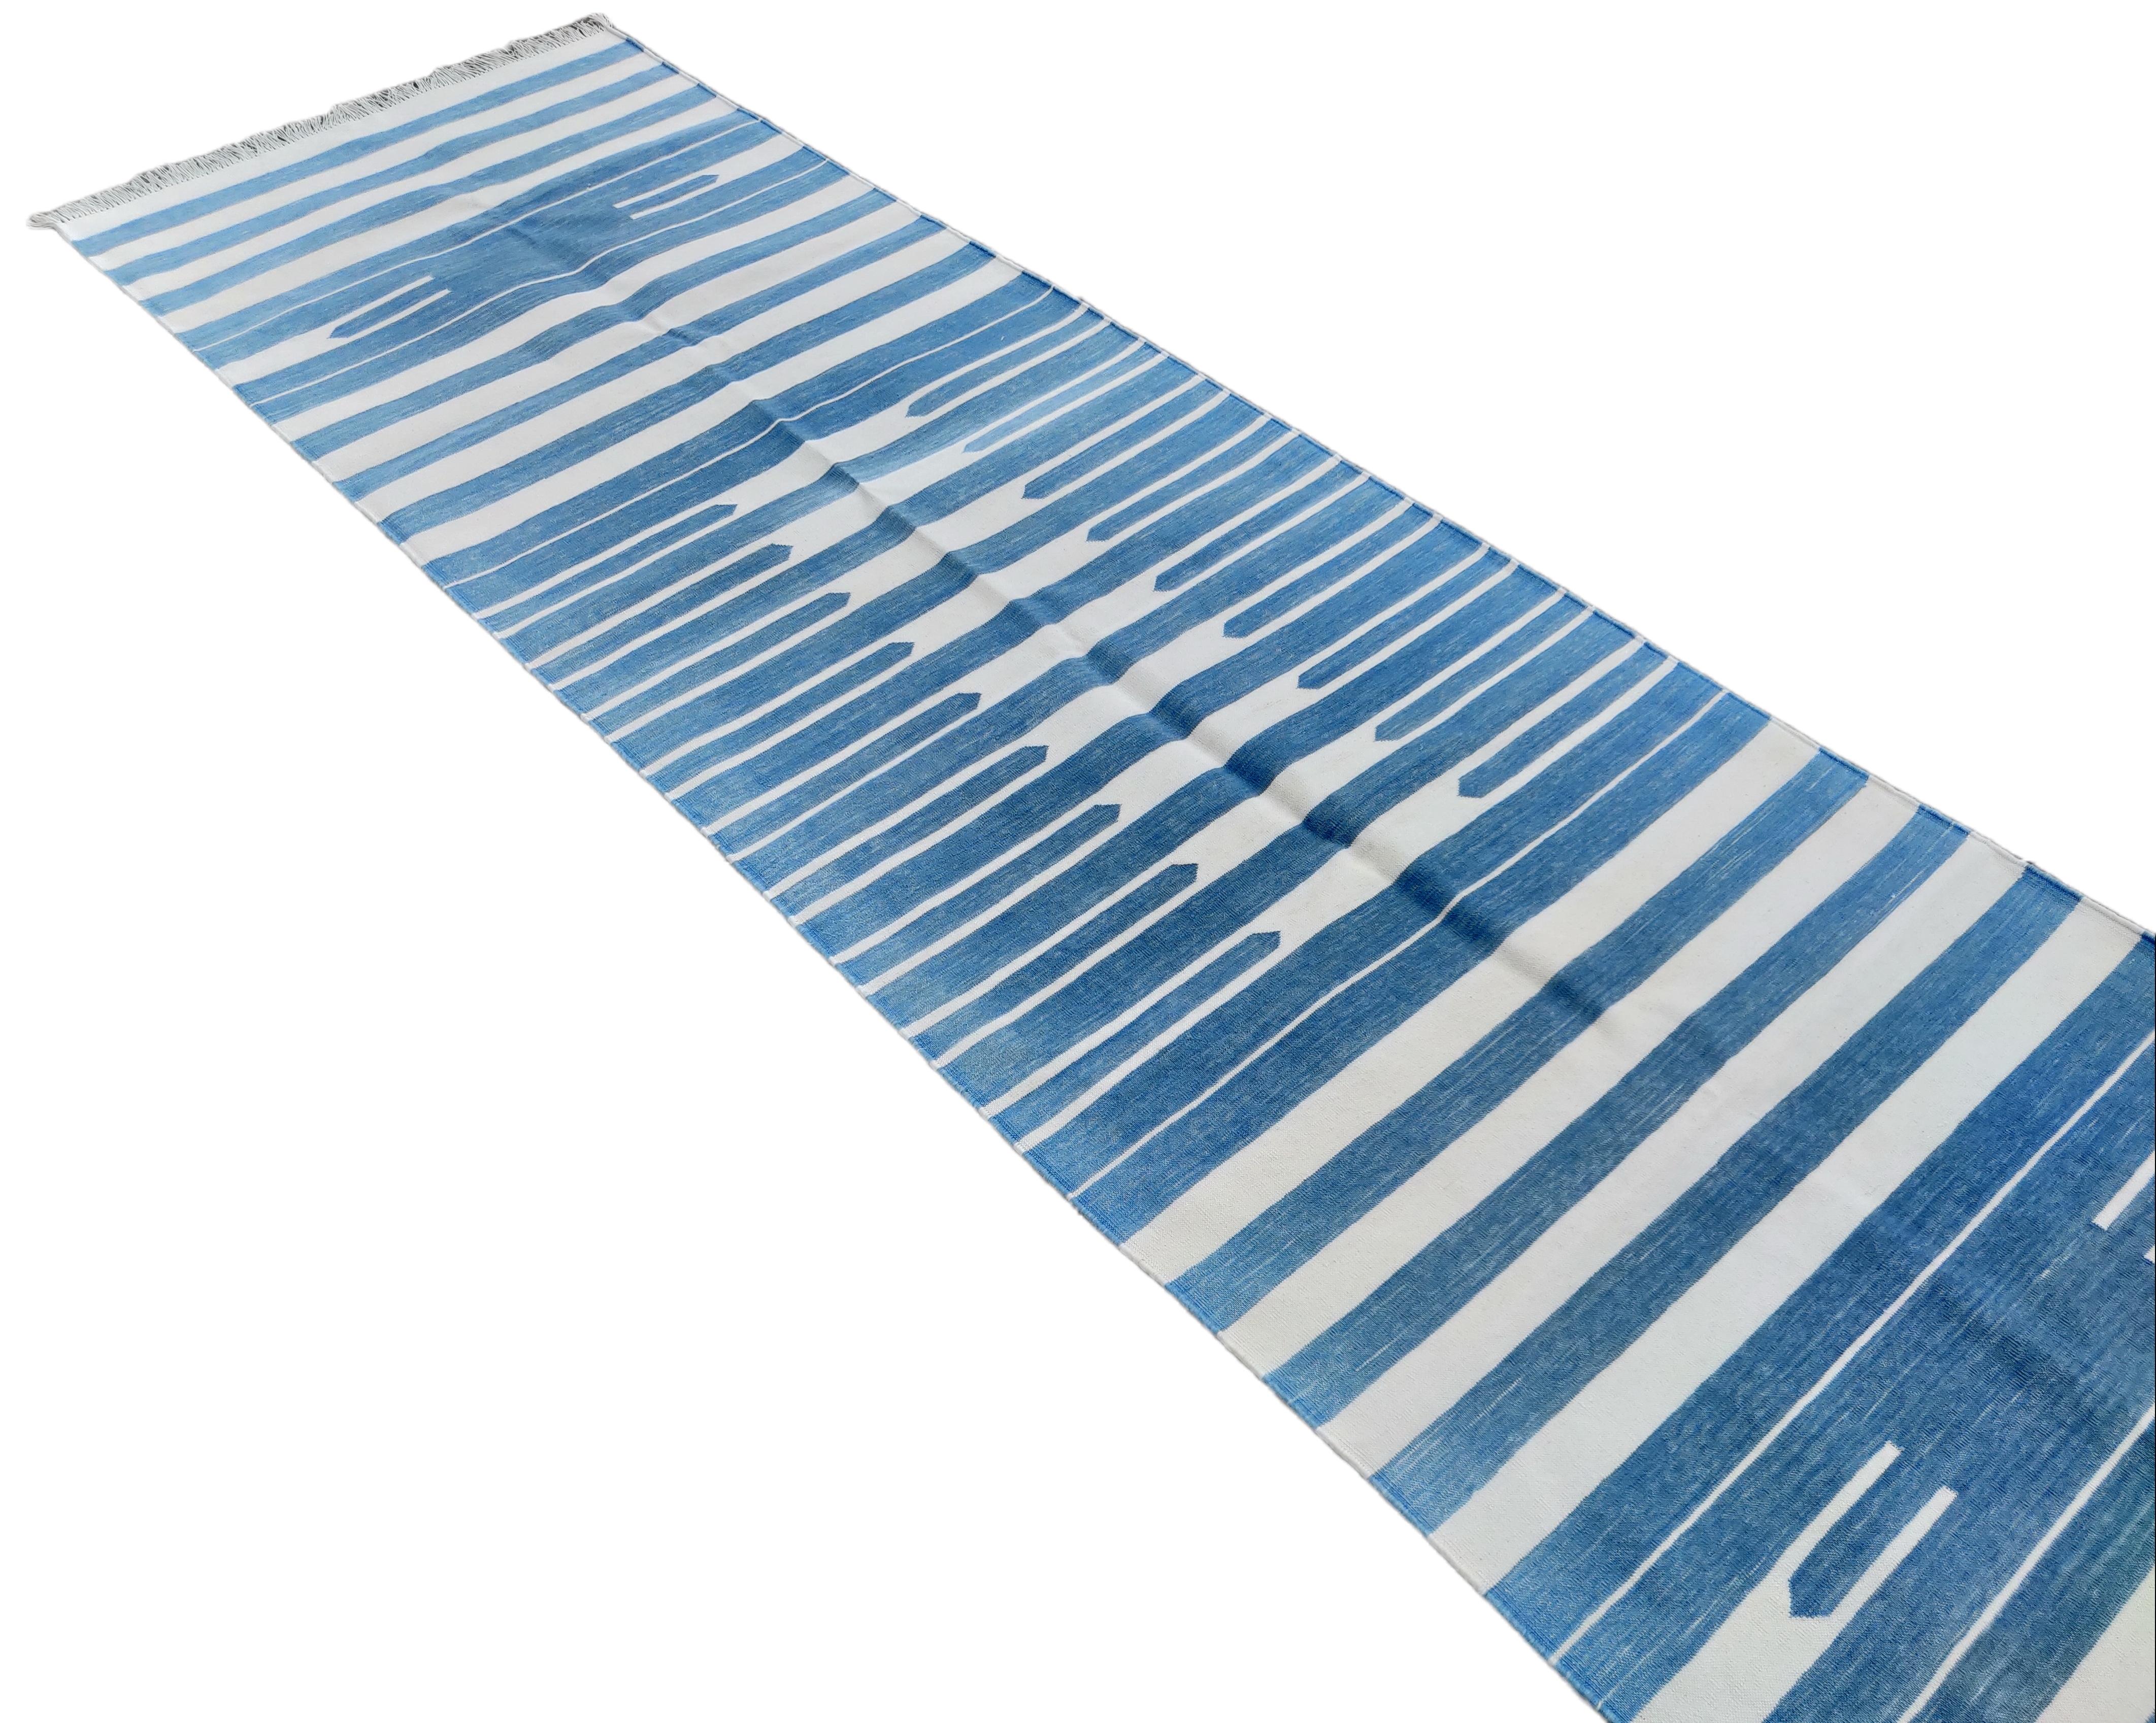 Indian Handmade Cotton Area Flat Weave Runner, 3x10 Blue And White Striped Dhurrie Rug For Sale